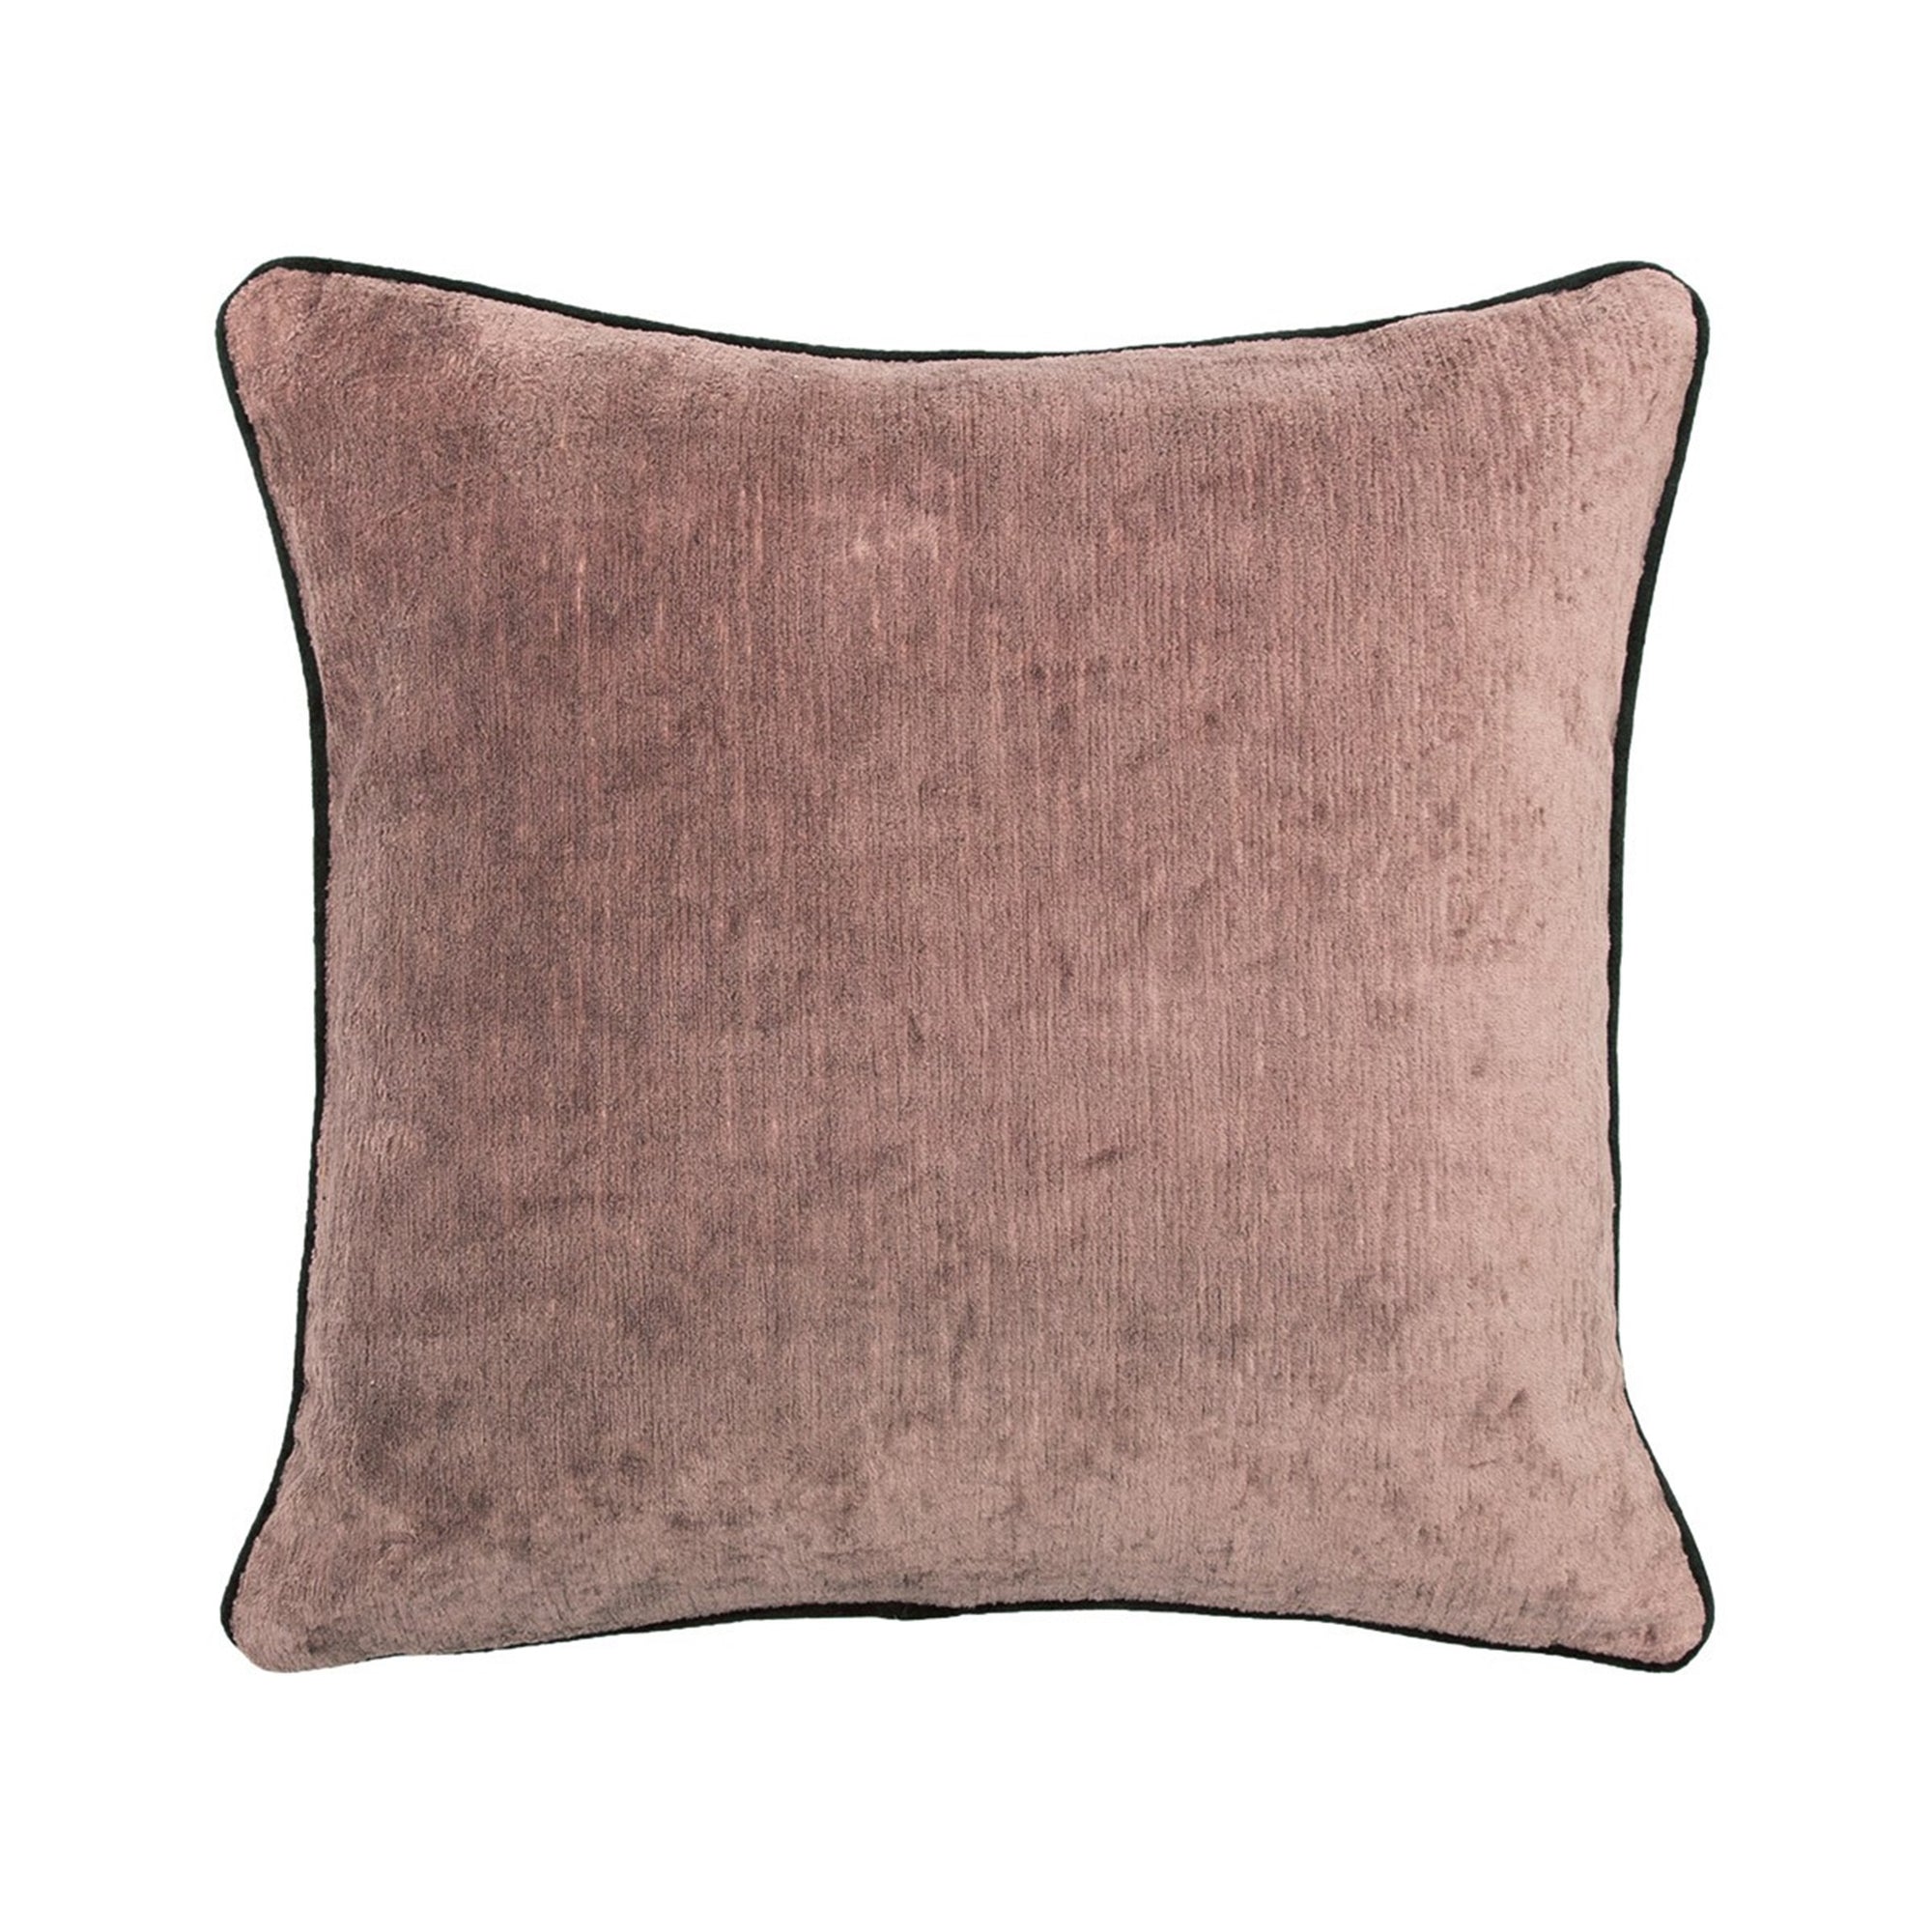 Silo Image of Yves Delorme Iosis Boromee Square Decorative Pillow in Parme Color